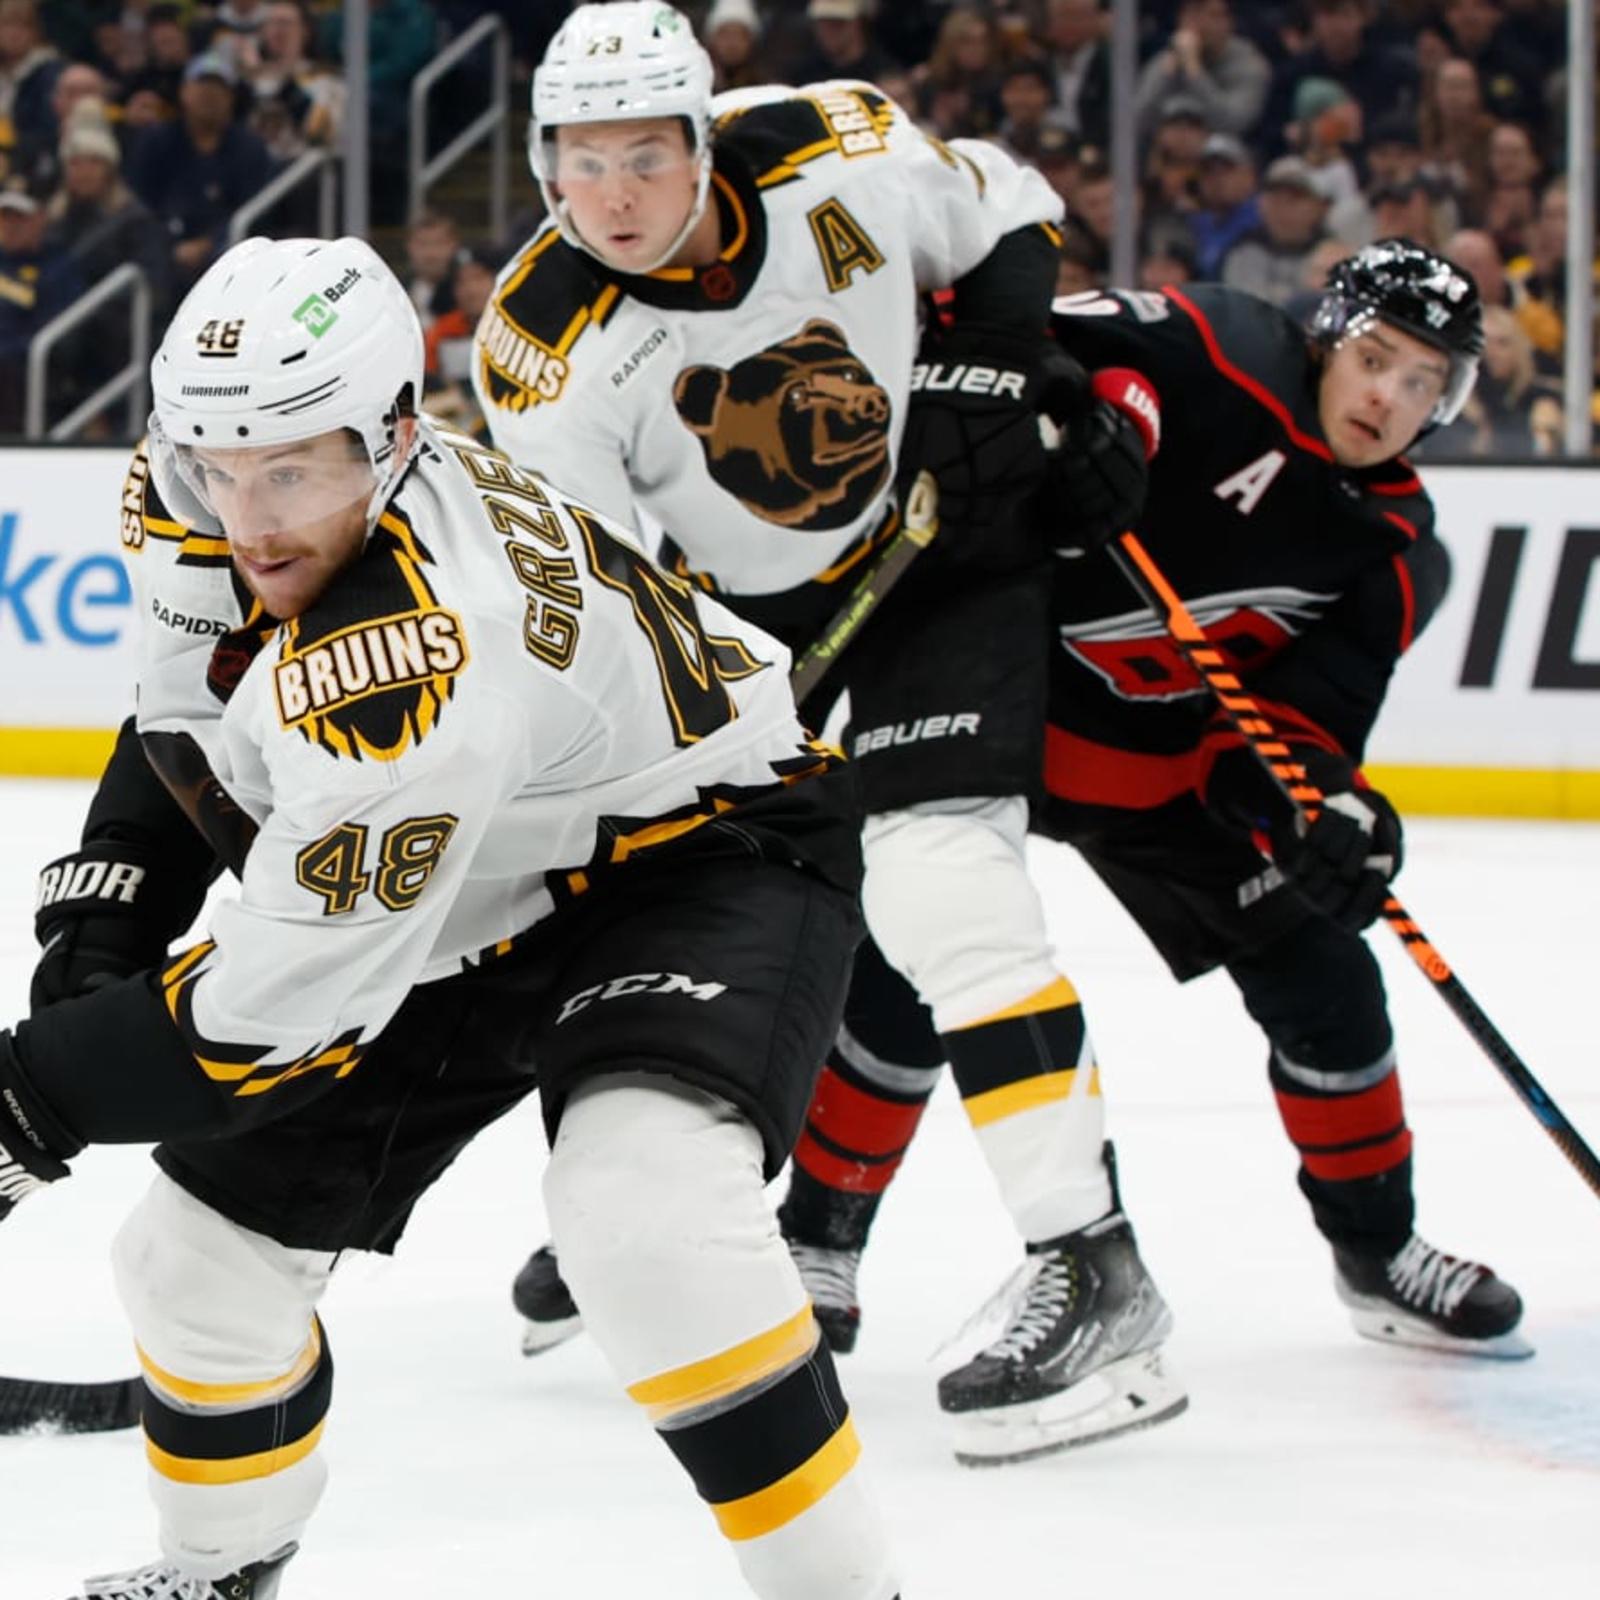 Boston Bruins' 10-game point streak ends in 4-2 loss to New York